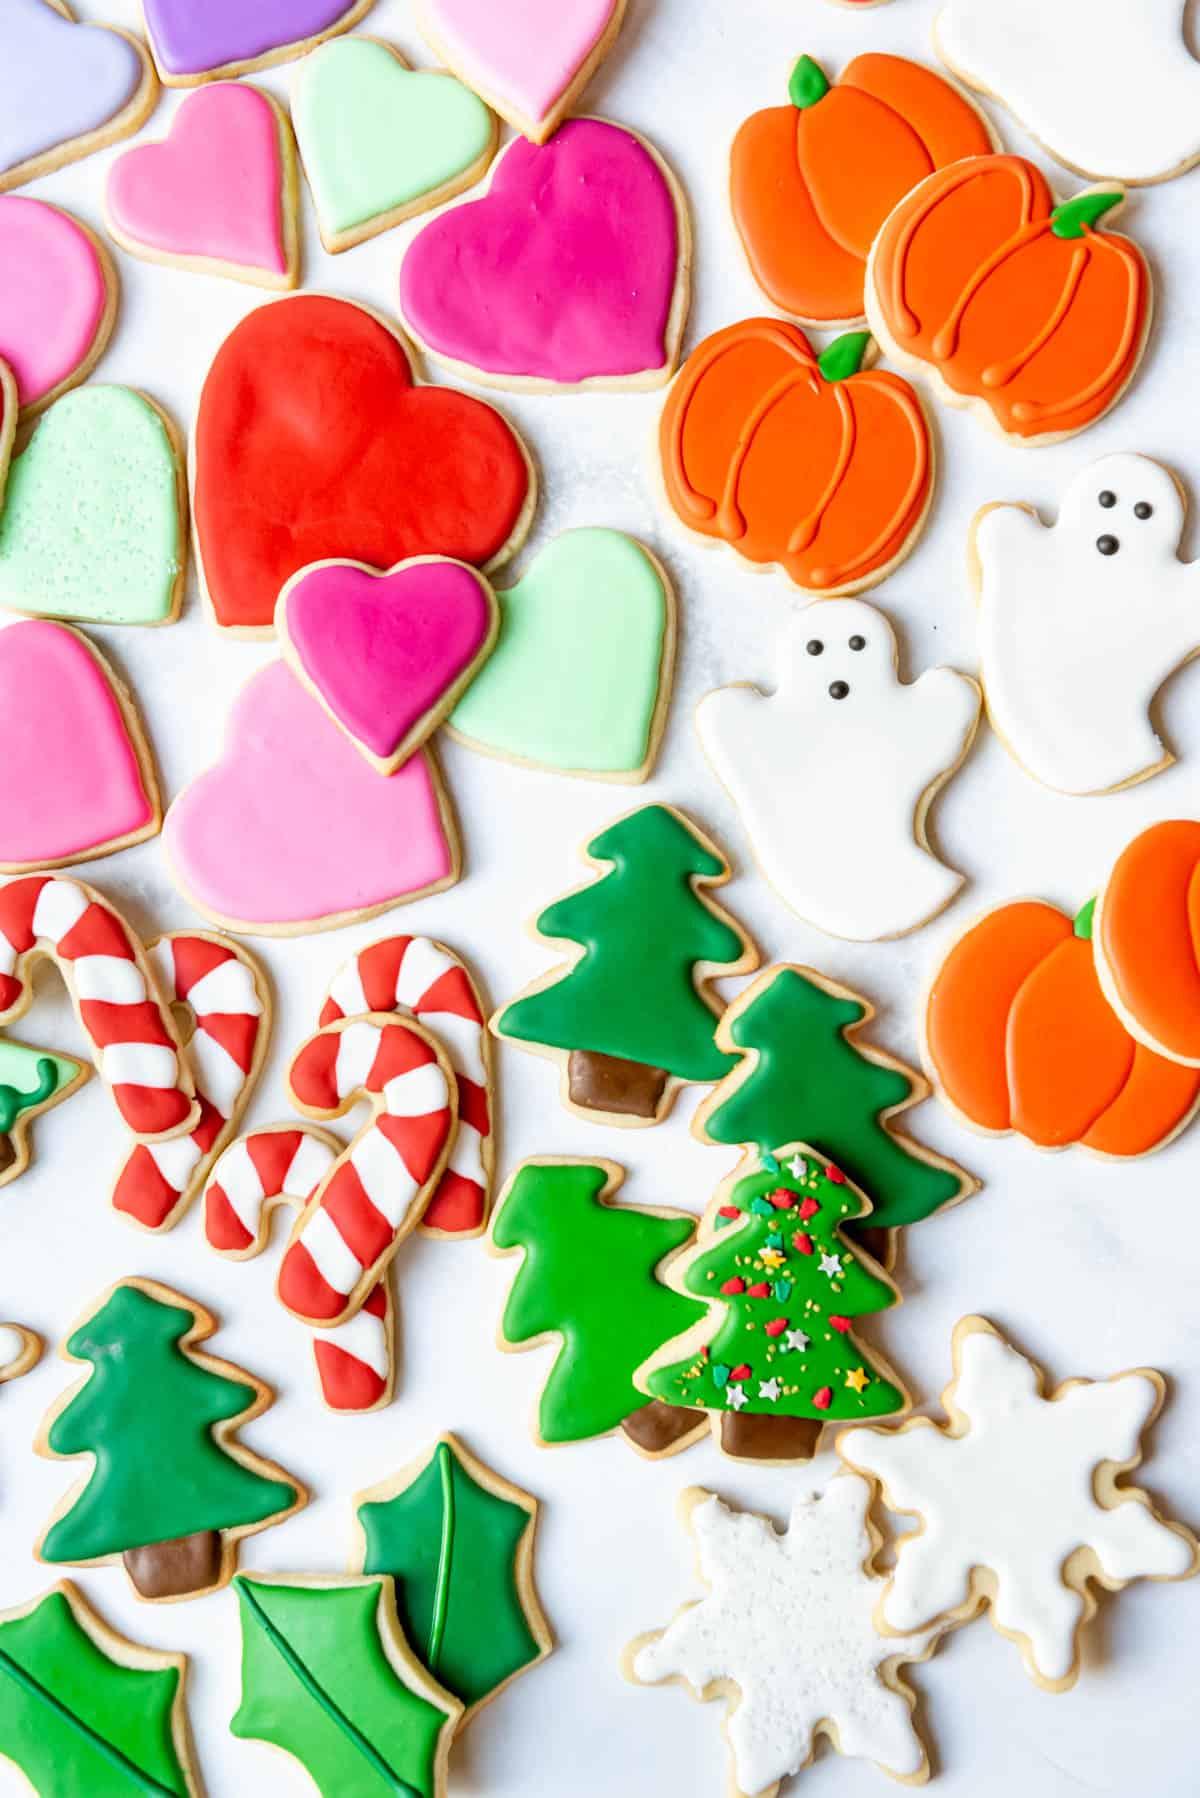 An overhead image of cut out sugar cookies decorated with royal icing in shapes of Christmas trees, candy canes, pumpkins, ghosts, and hearts.